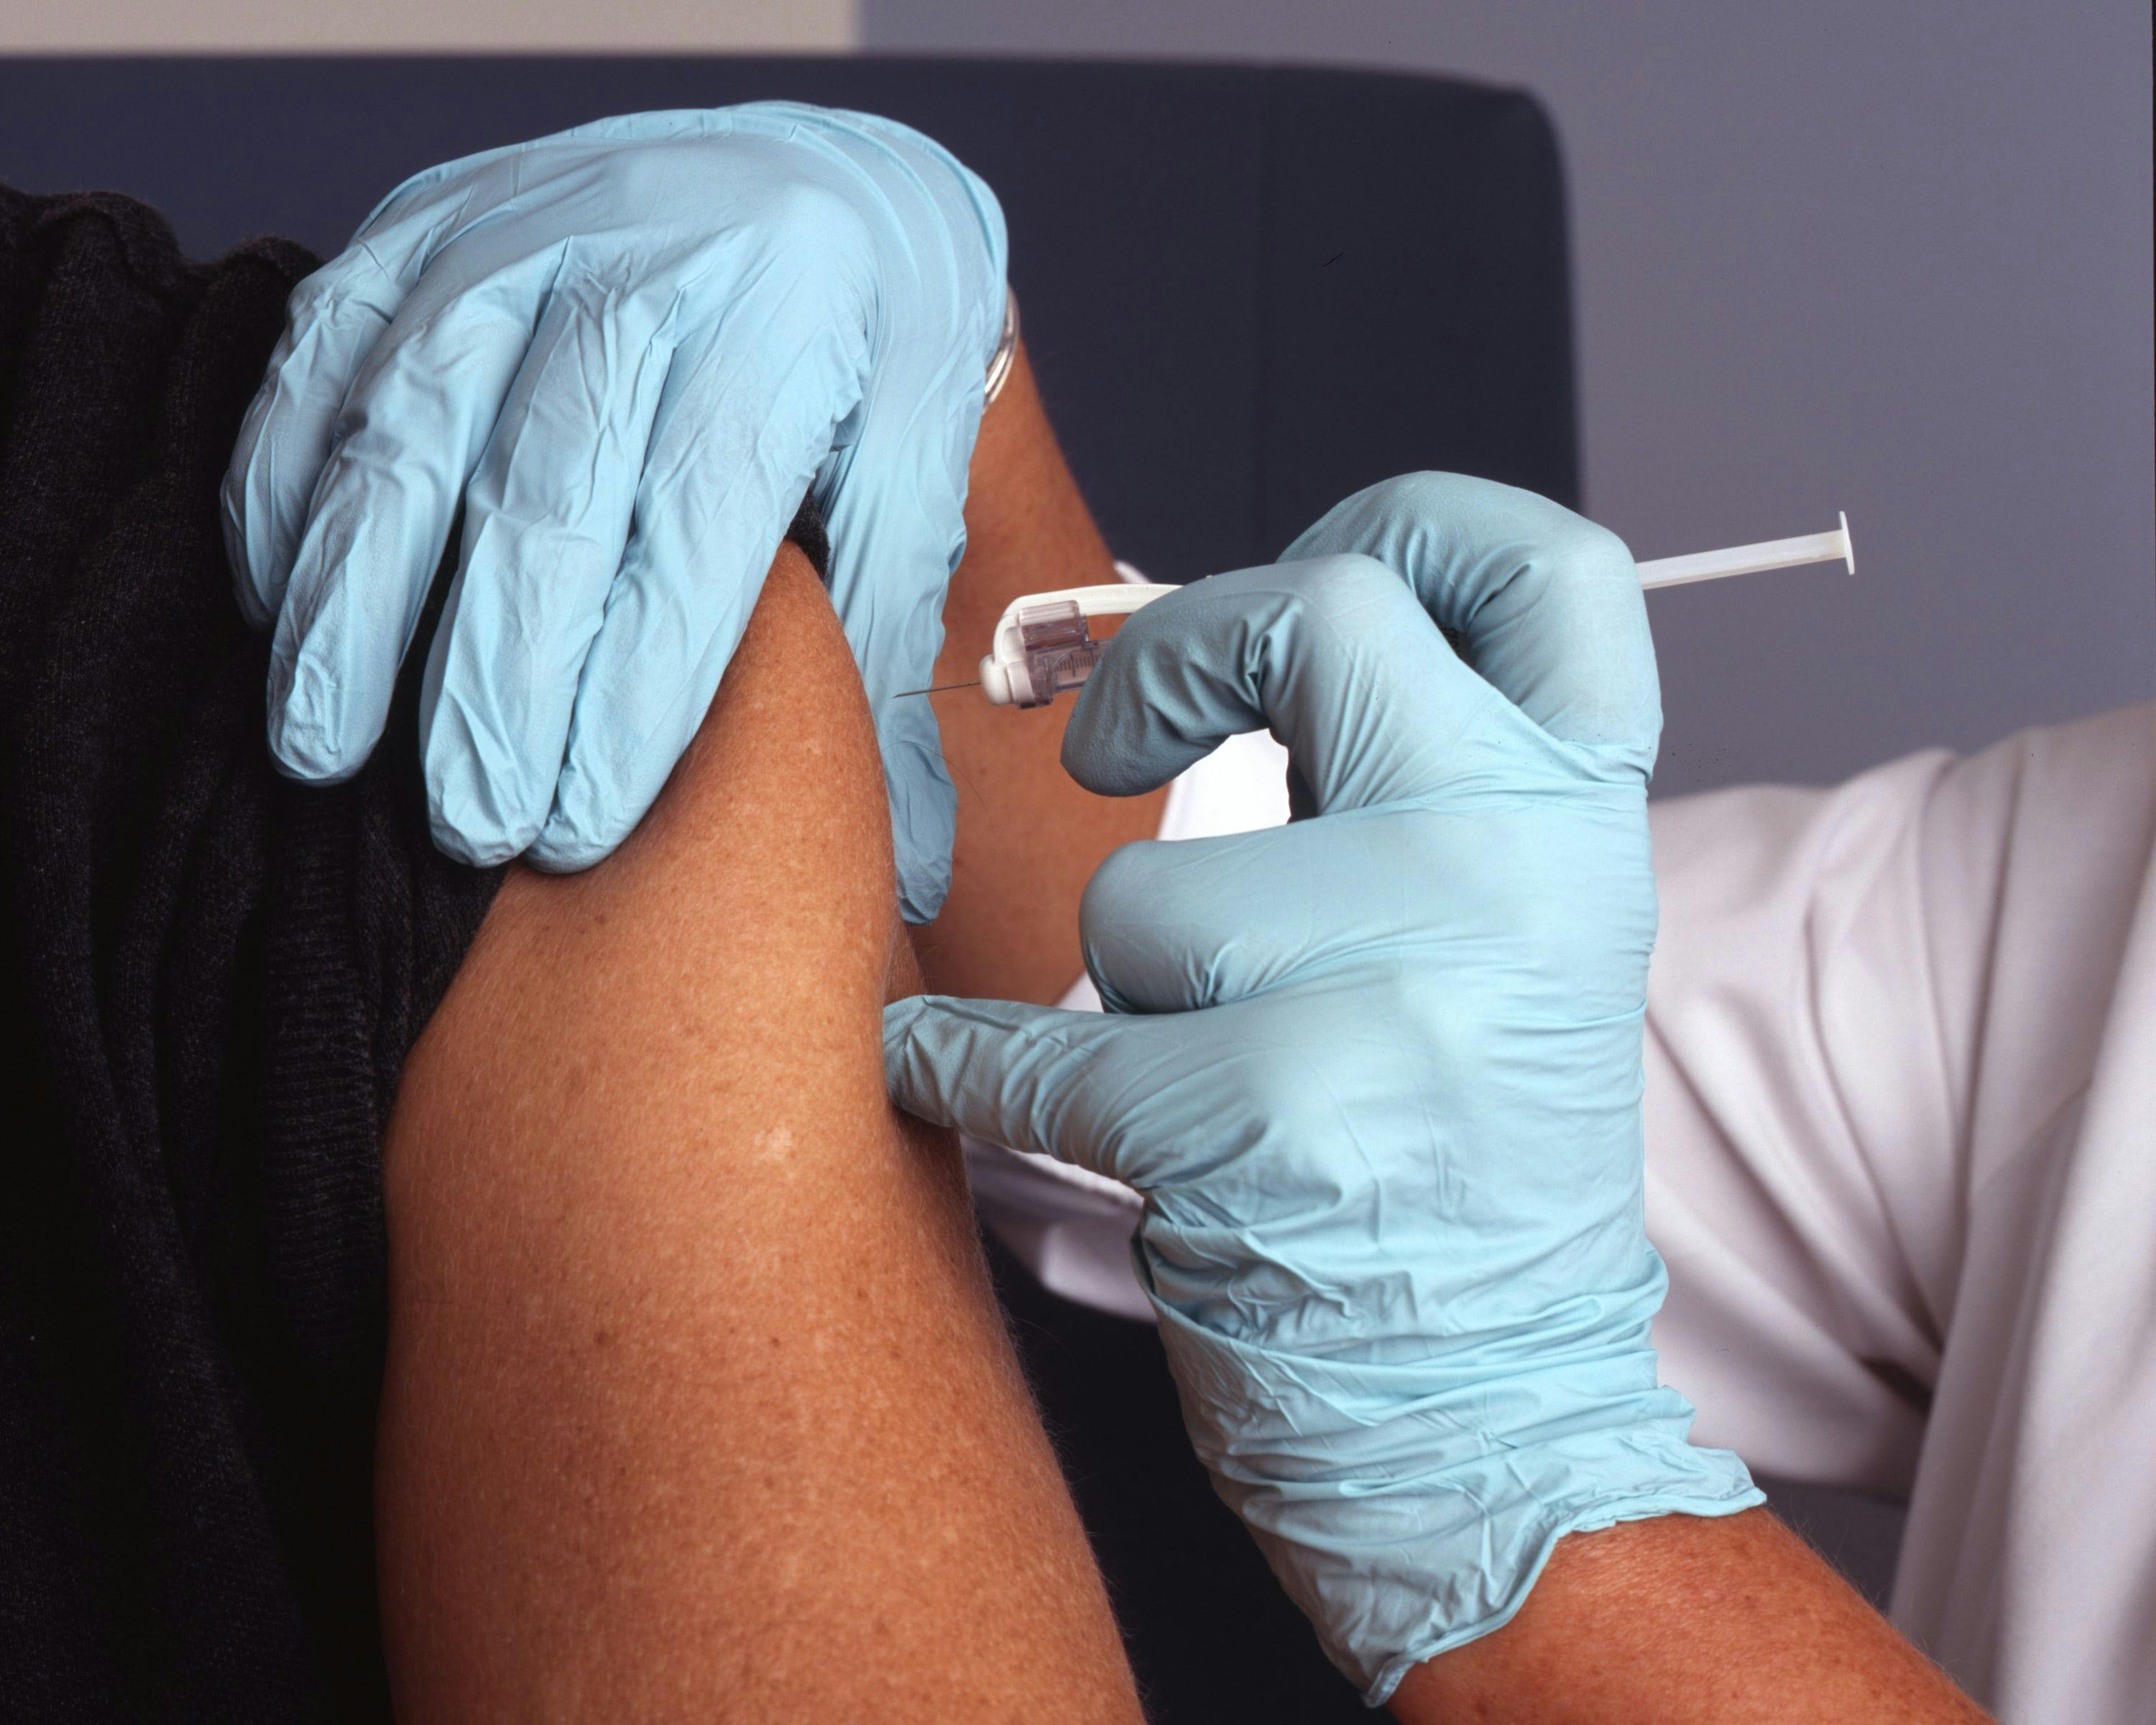 Public Health Watch: Infection Rare in Vaccinated Healthcare Workers